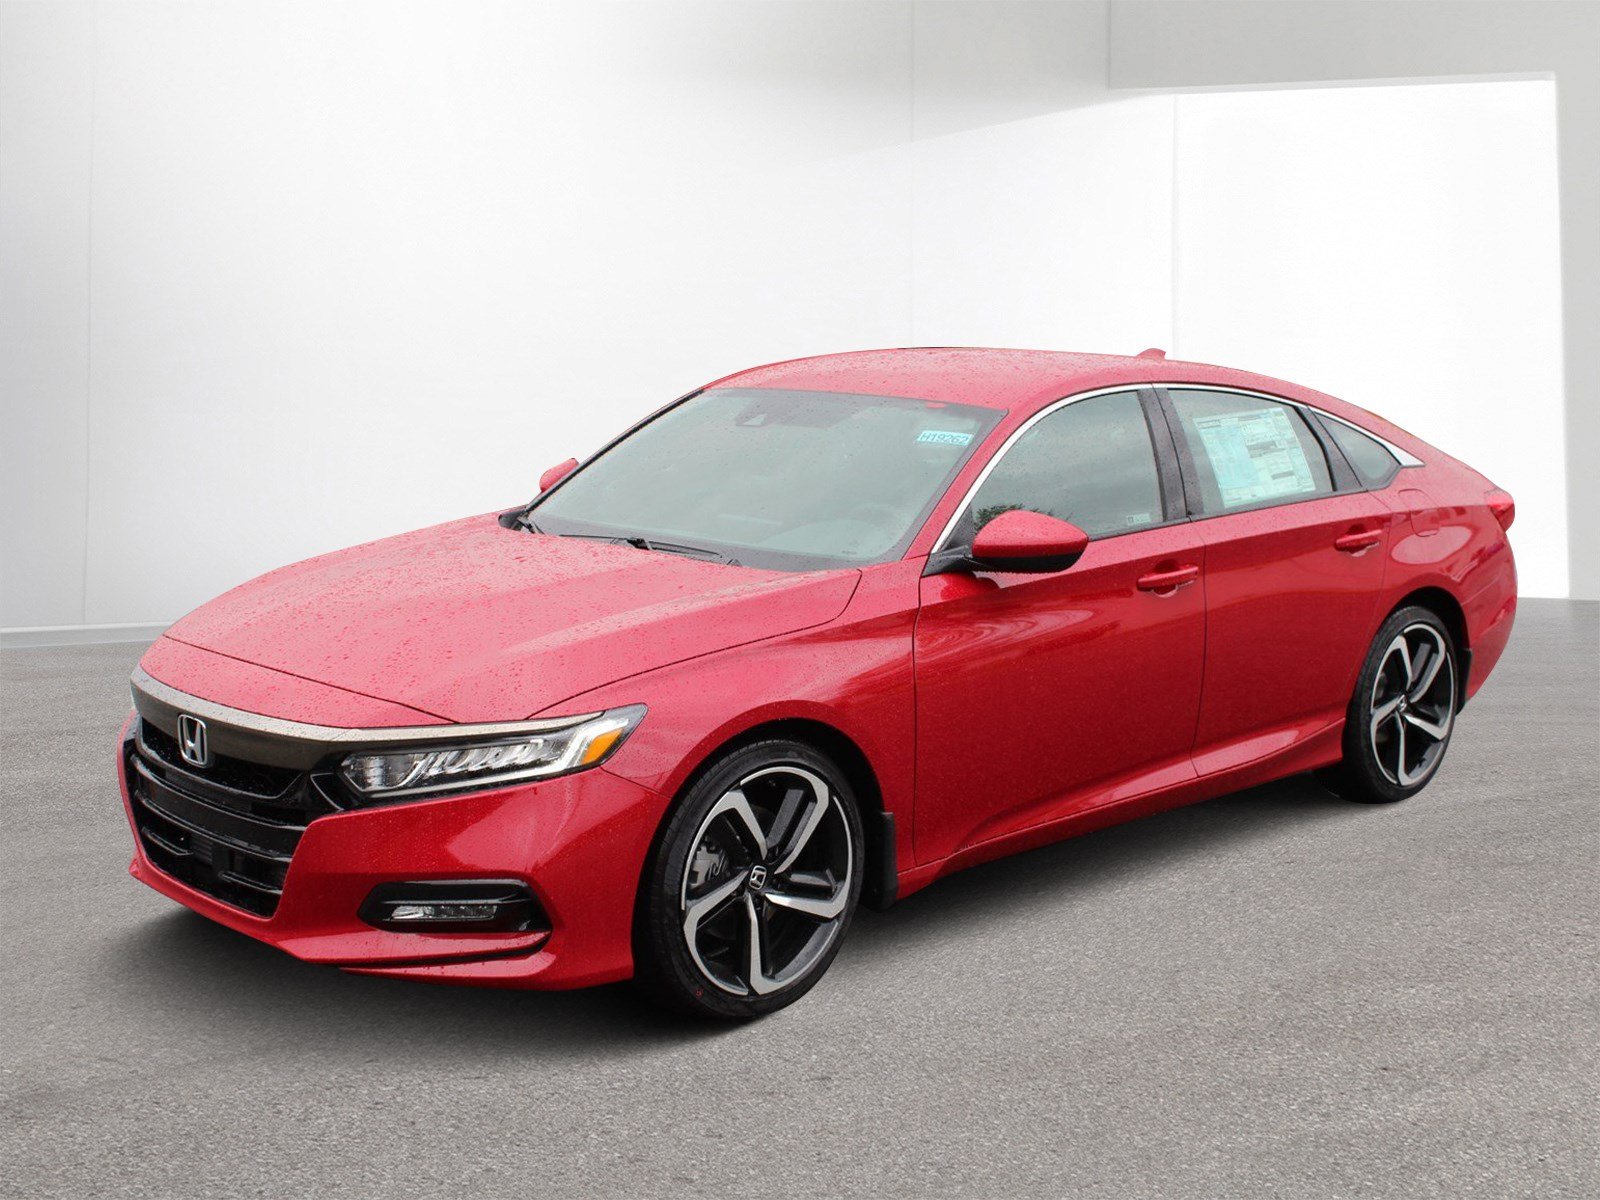 New 2019 Honda Accord Sport 1.5T 4dr Car in Milledgeville #H19262